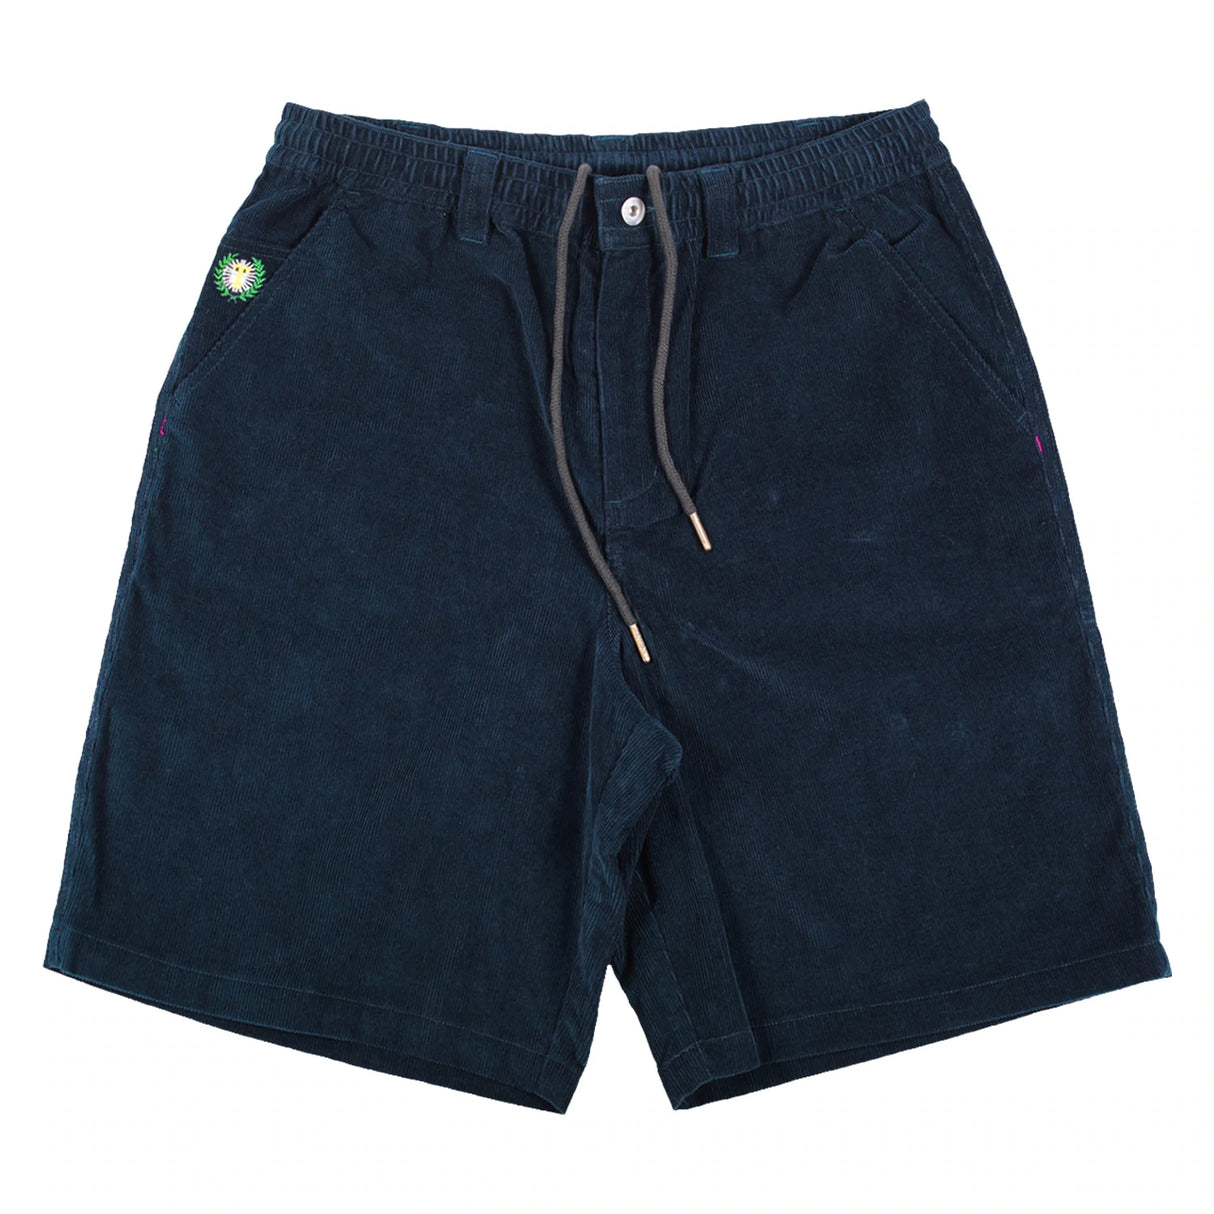 Theories Courduroy Lounge Navy Shorts